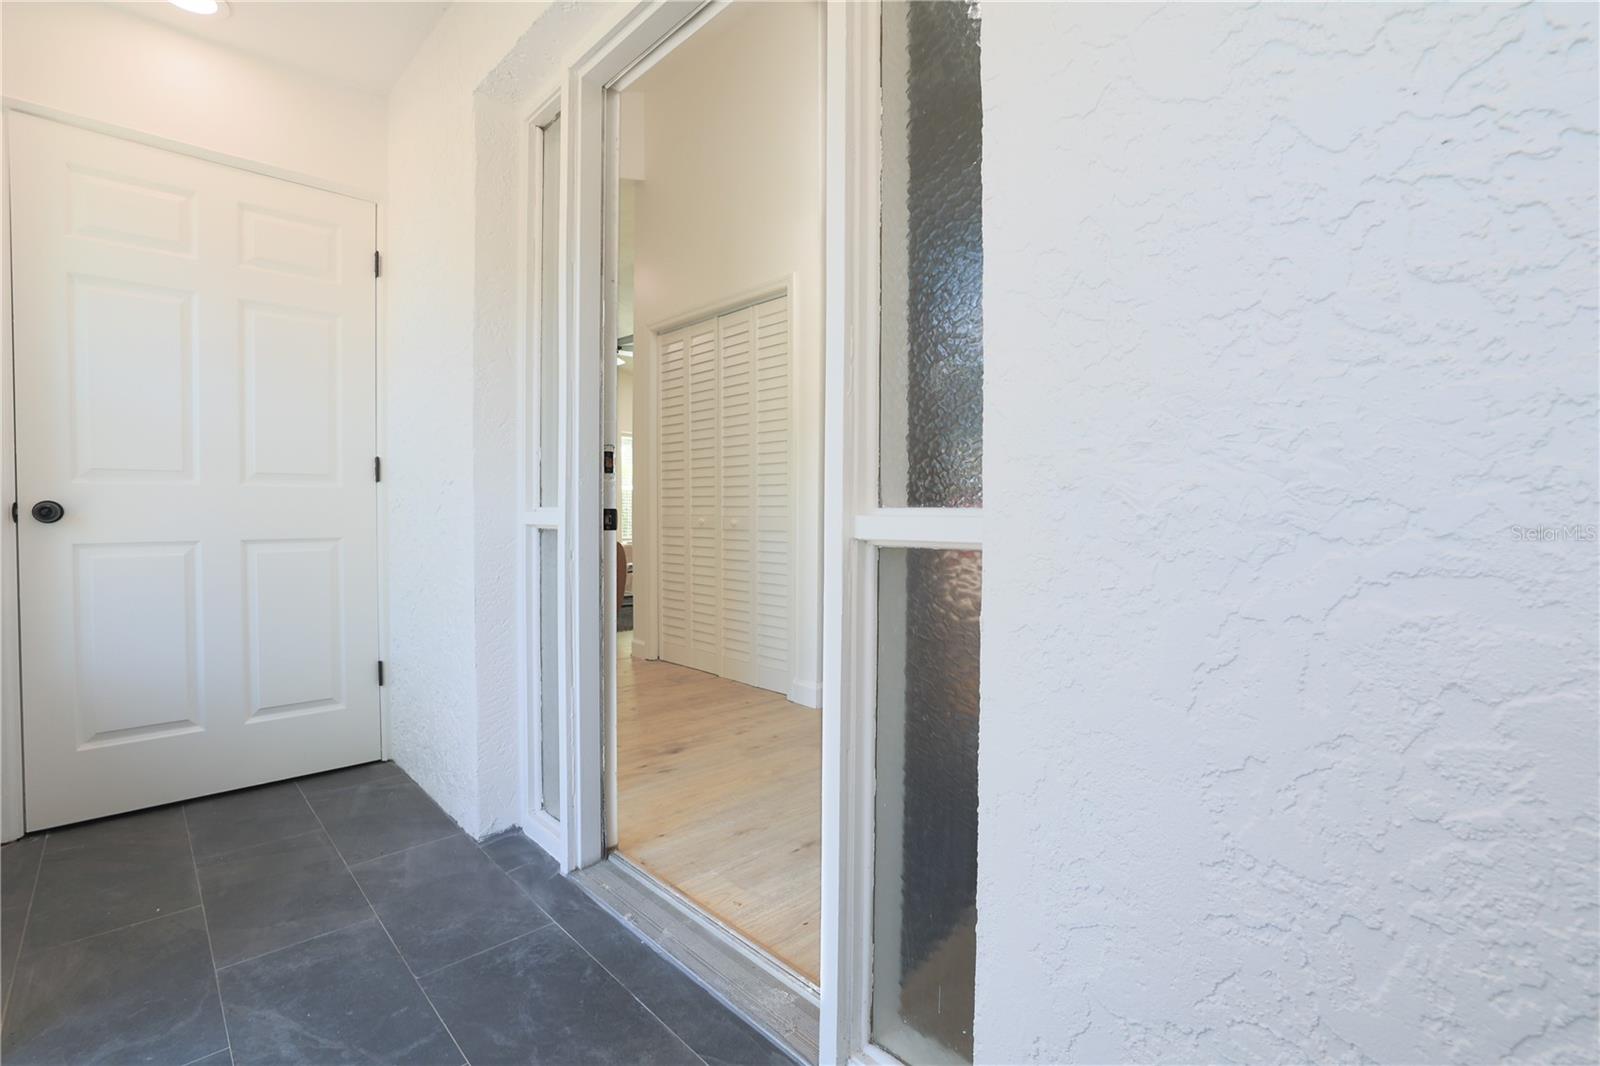 Enclosed front entrance with 2 storage closets